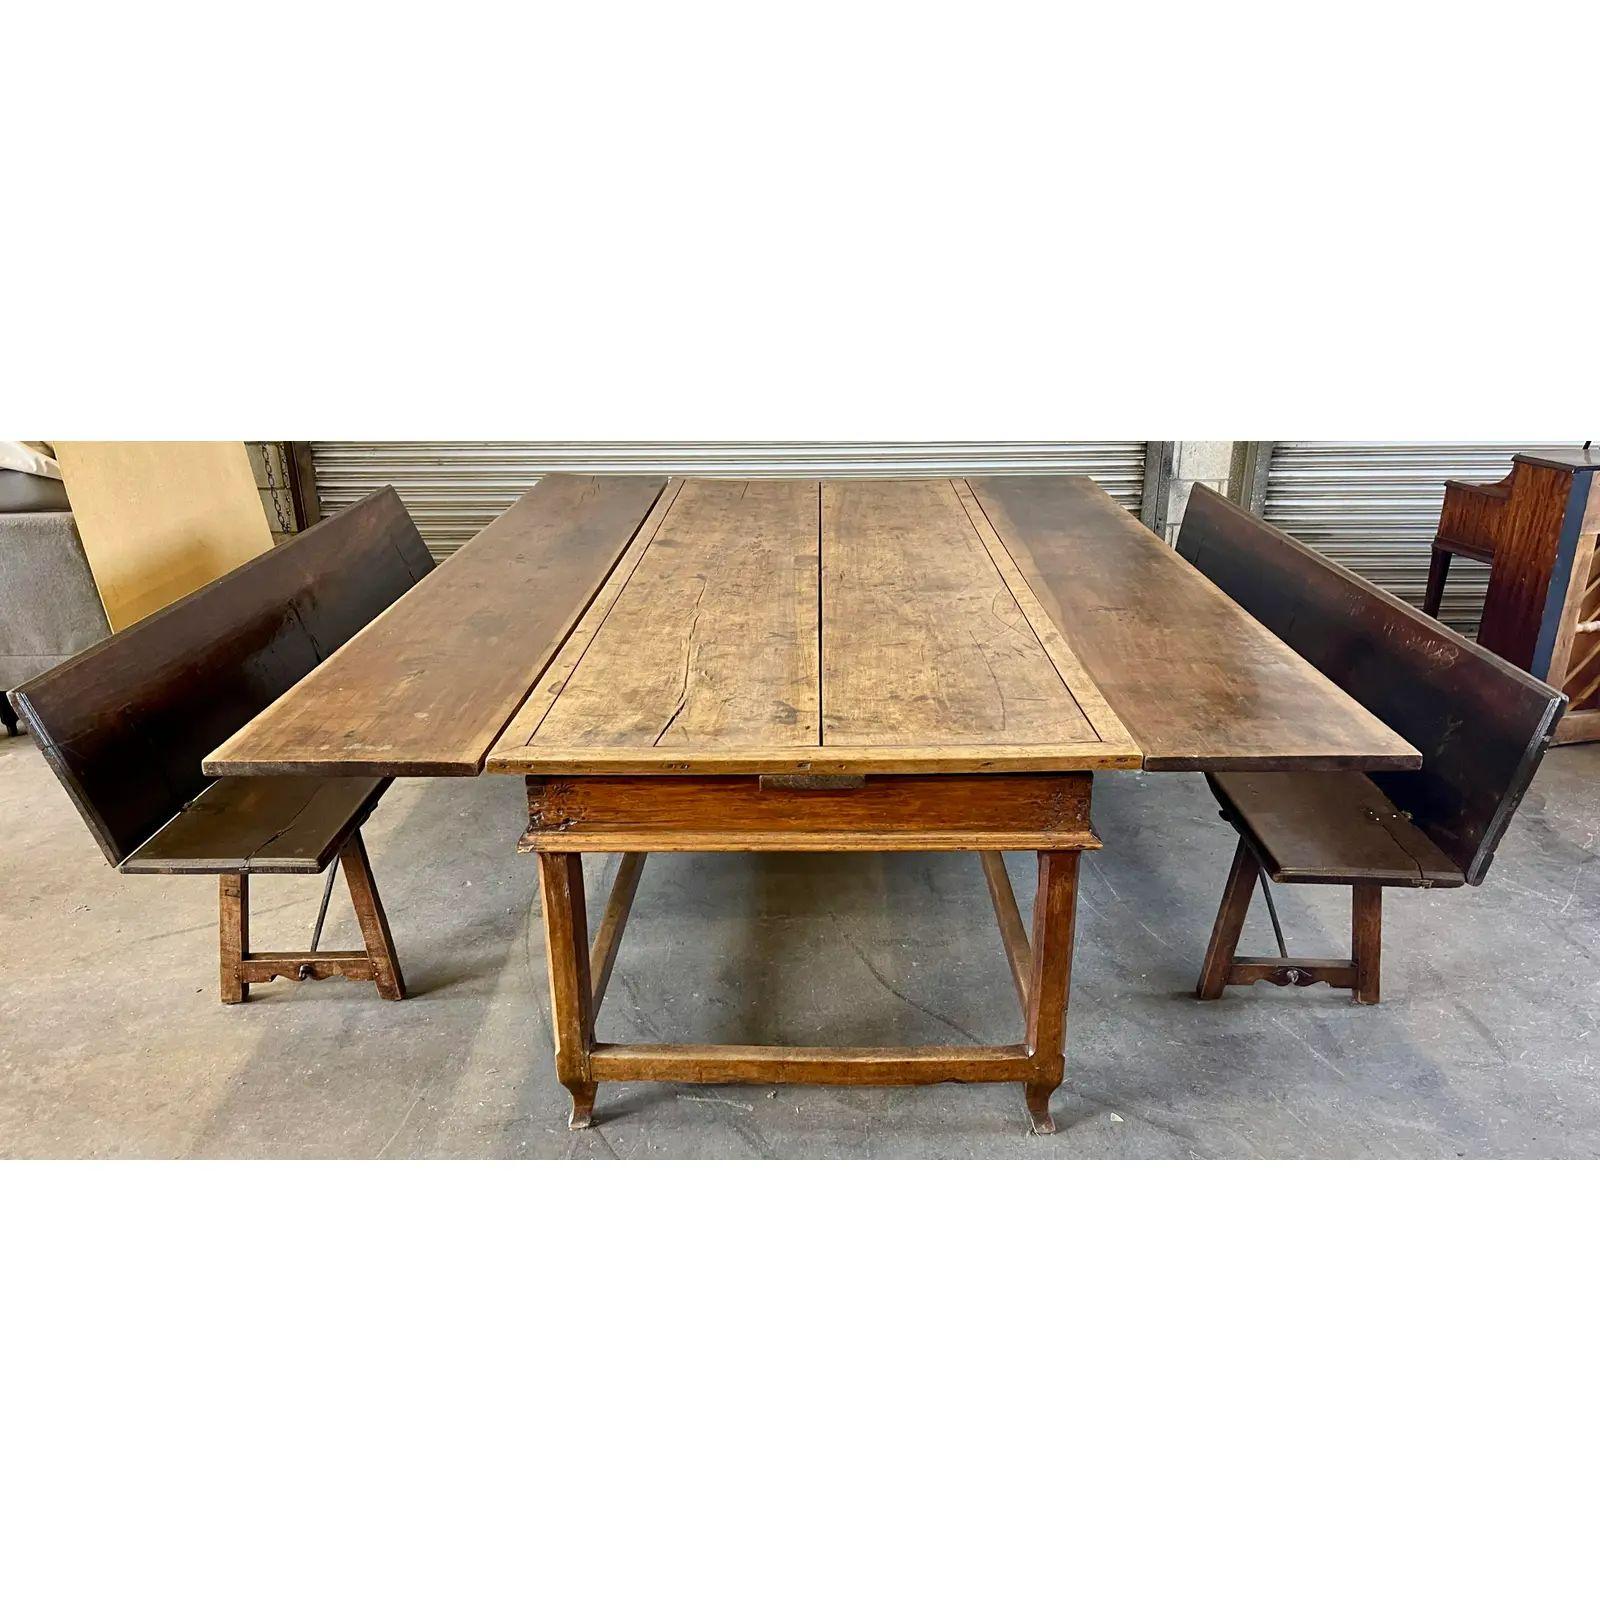 Antique French Country Farmhouse Extension Table & Bench Seating, 18th Century For Sale 3